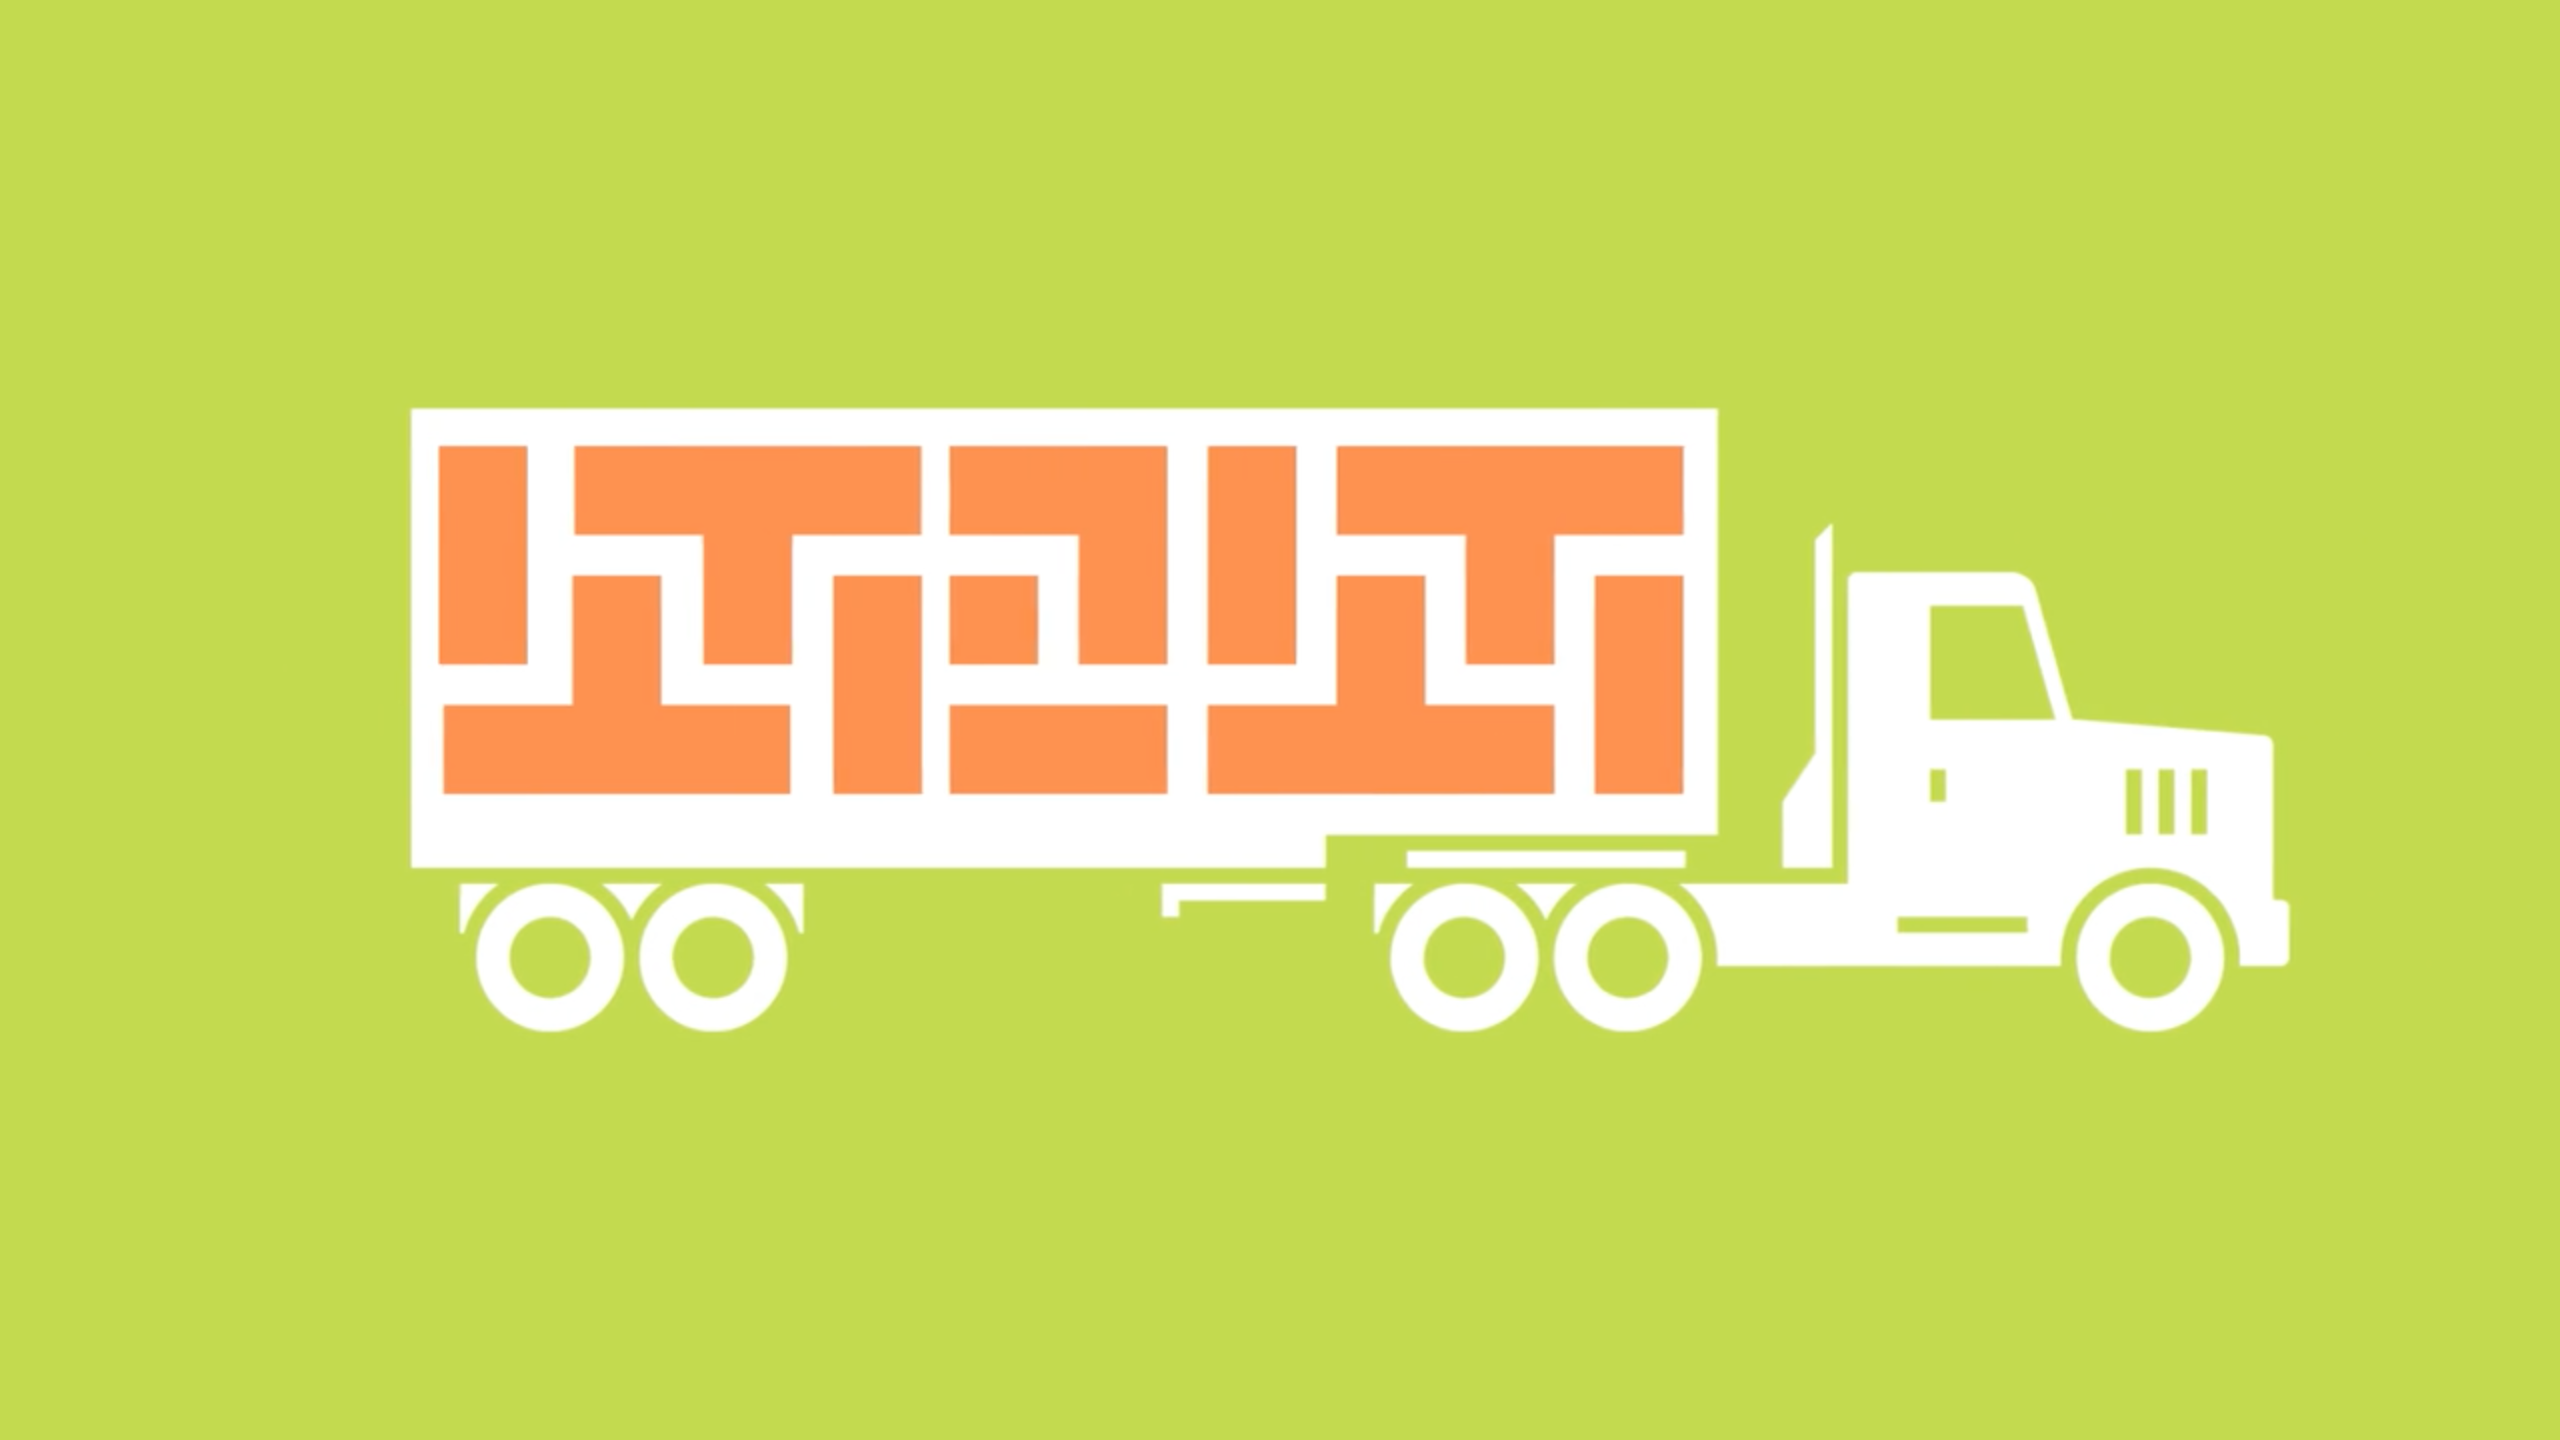 A thumbnail image featuring a Macbook screen consisting of a flat, illustrative white and orange truck on a lime green background.